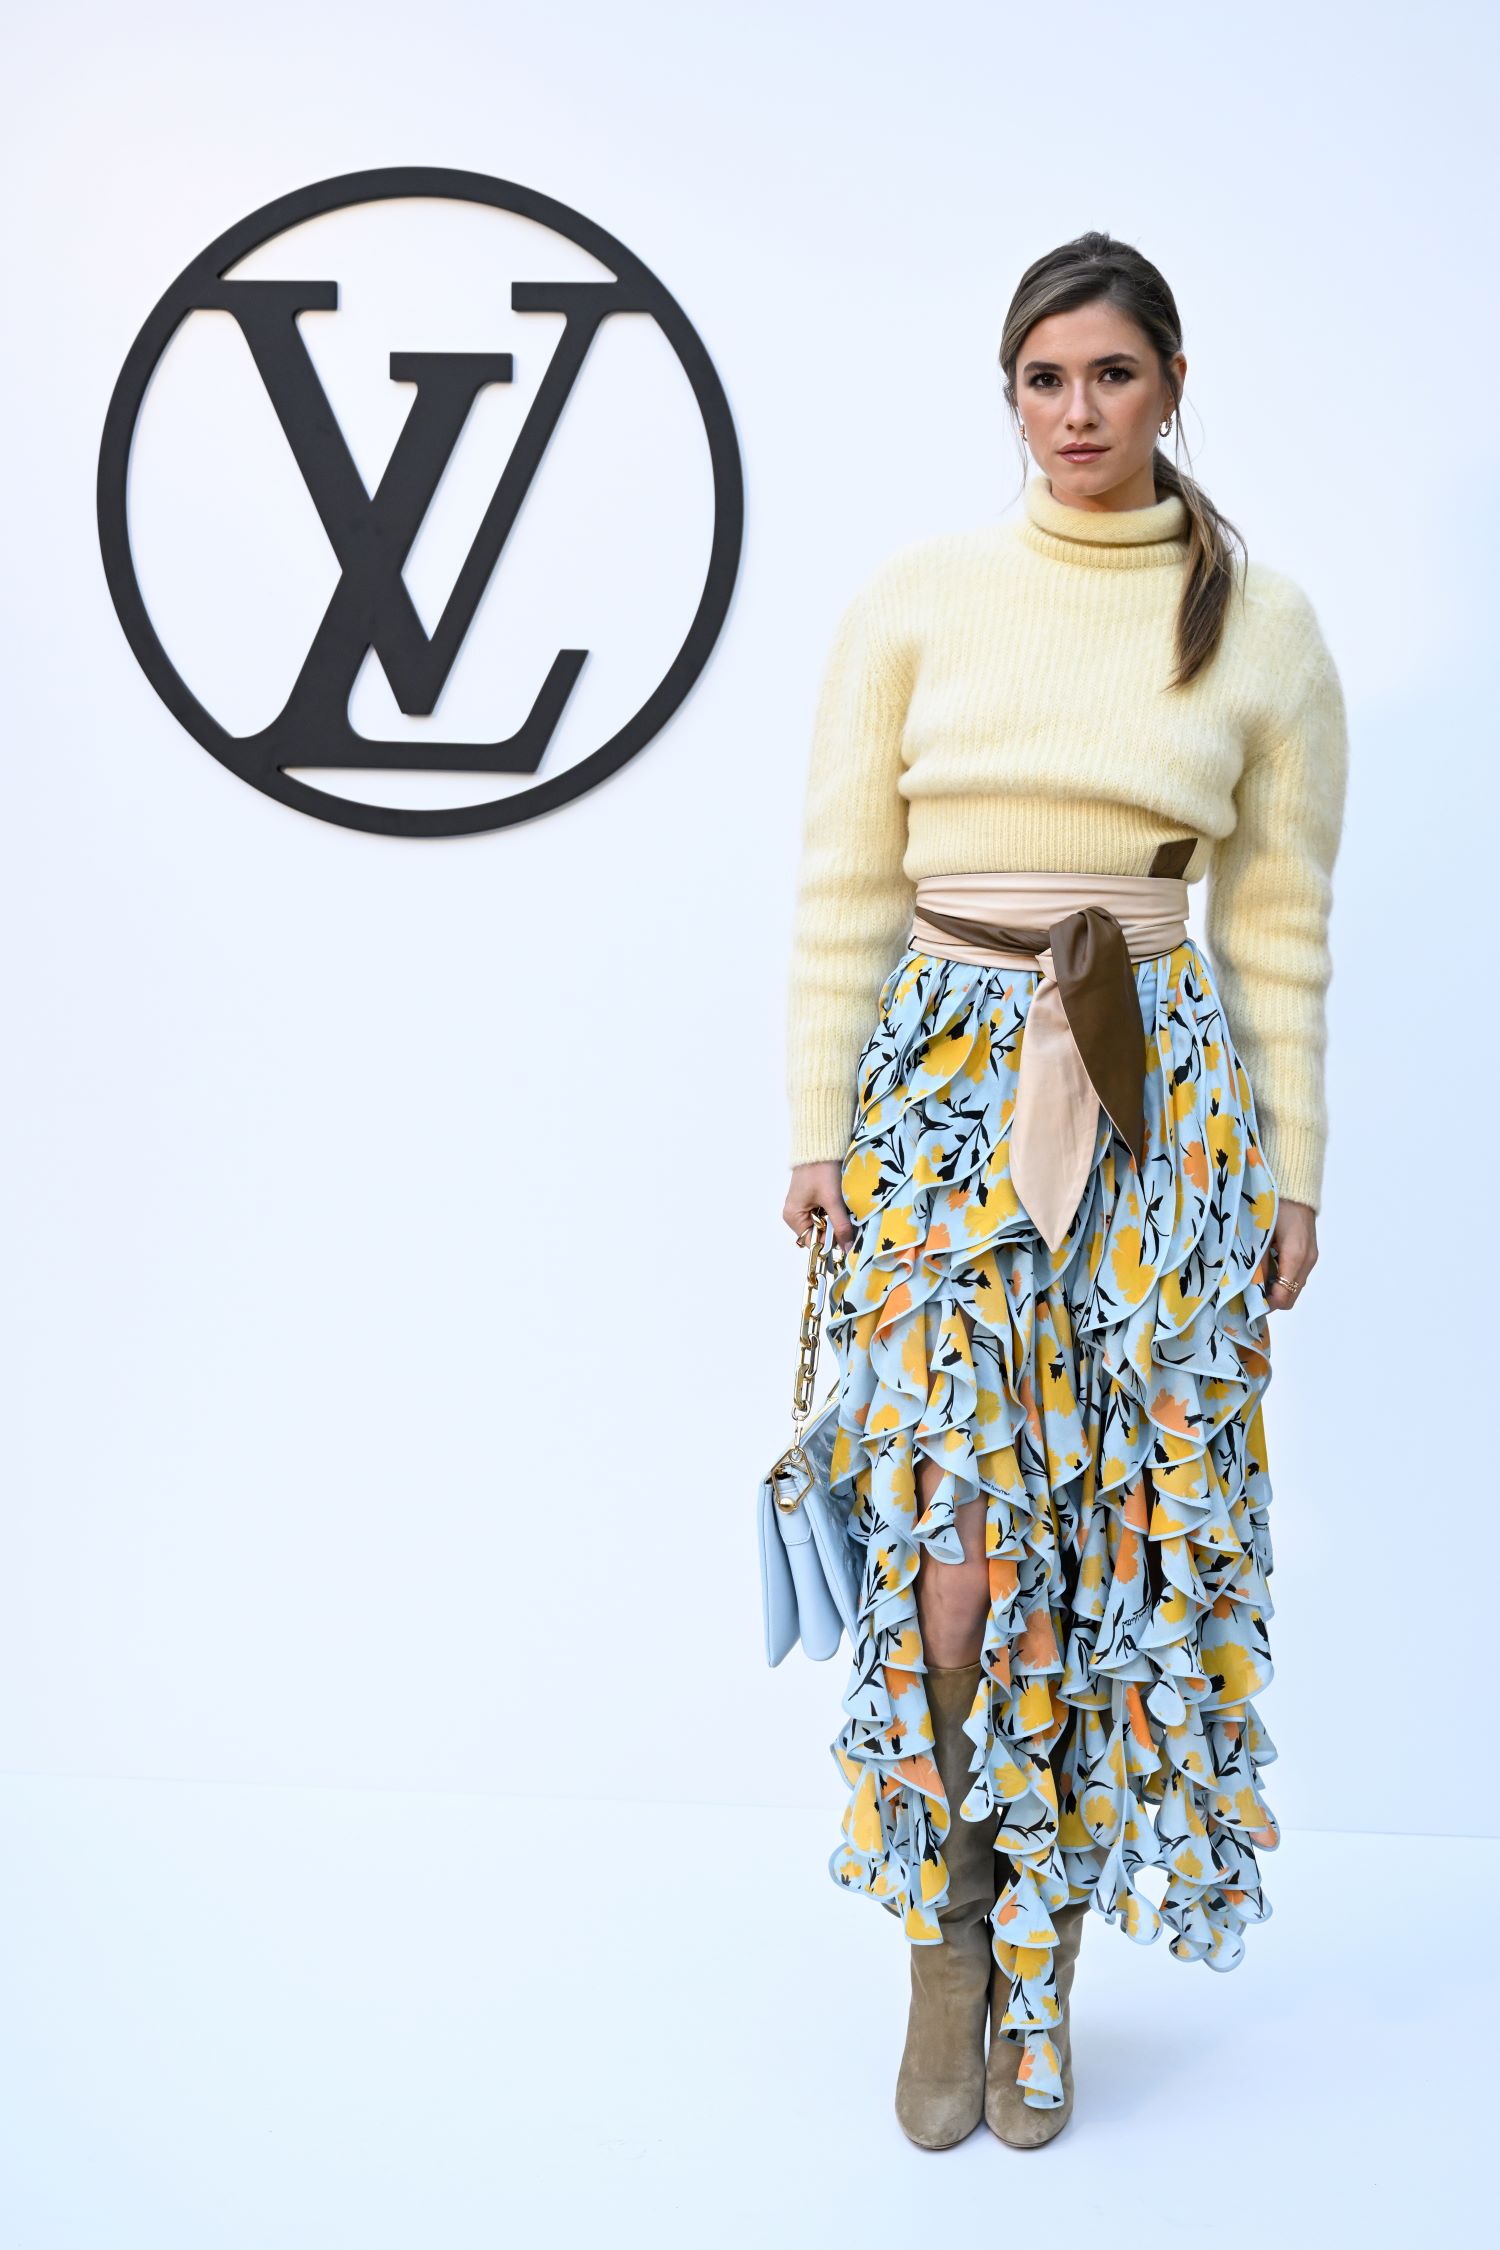 ZITA D'HAUTEVILLE attending the Cruise 2025 Fashion Show by Louis Vuitton in Barcelona | CRUISE 2025 FASHION SHOW COLLECTION © Louis Vuitton – All rights reserved | Courtesy of Gnazzo Group.